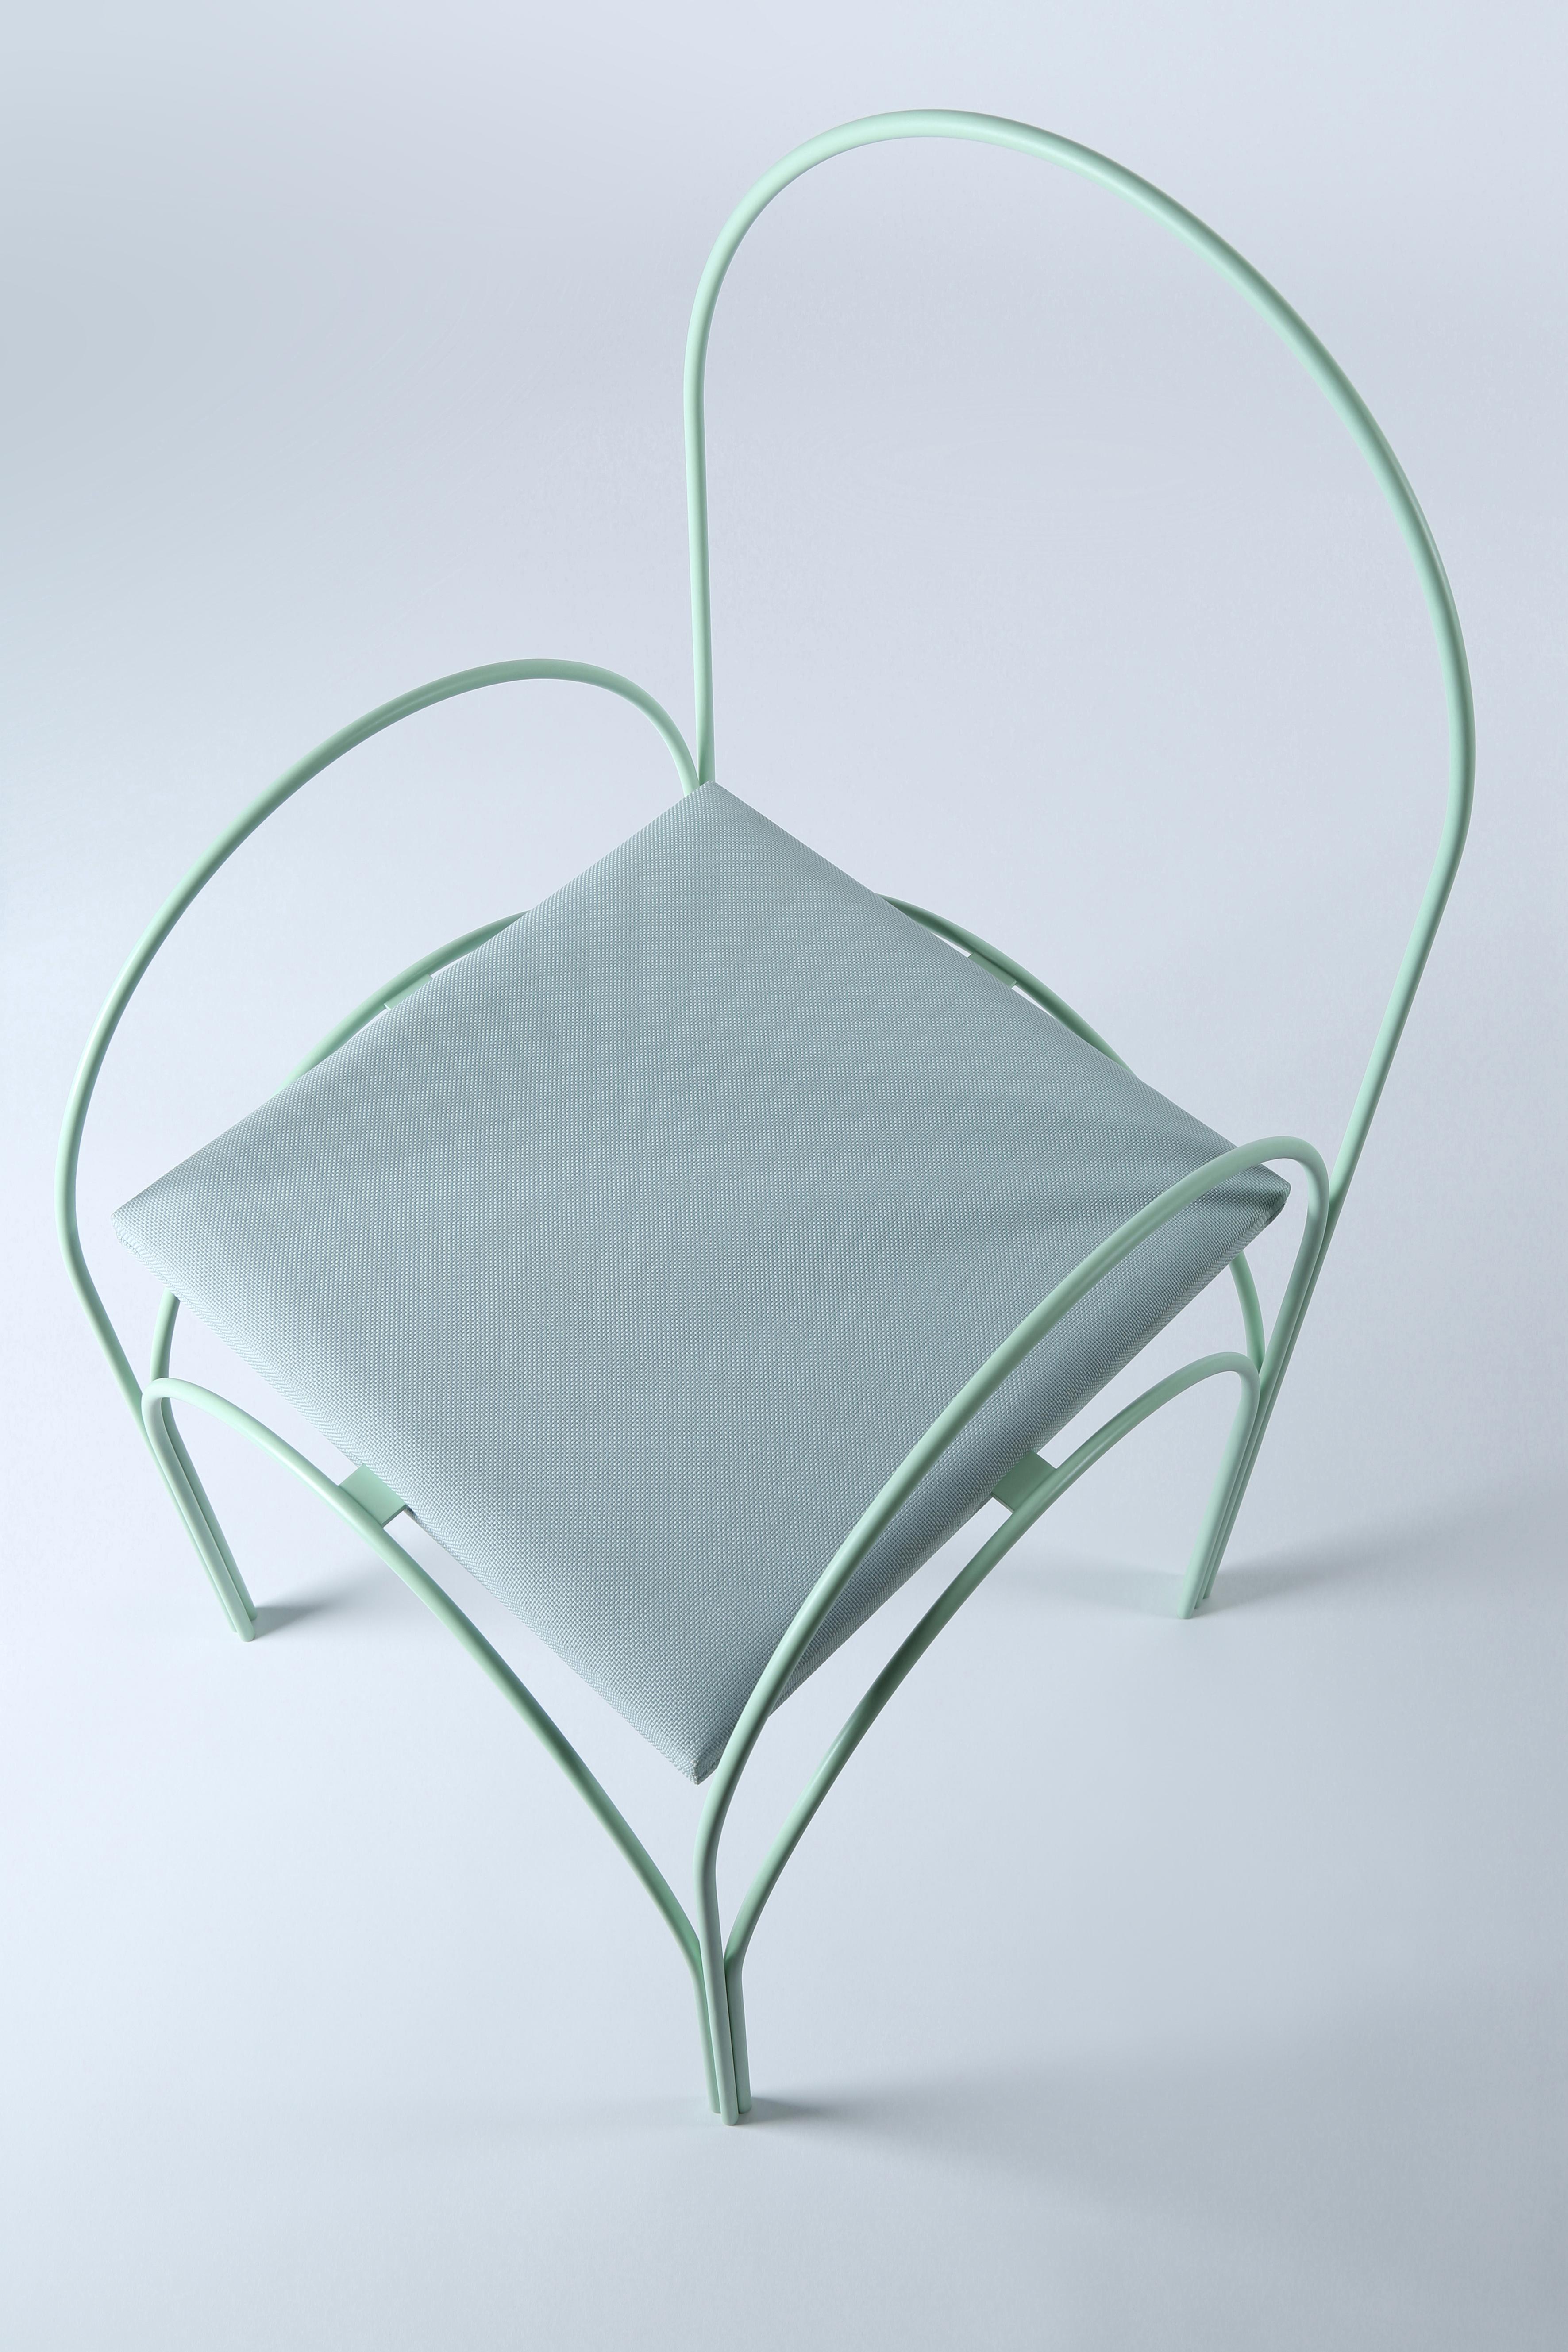 Hawa Beirut naked chair by Richard Yasmine
Materials: structure in powder coated metal, fabric upholstery 
Dimensions: H 92 cm x W 46cm x D 47cm

HAWA Beirut, a collection of very light or airy furniture inspired from the Lebanese architecture